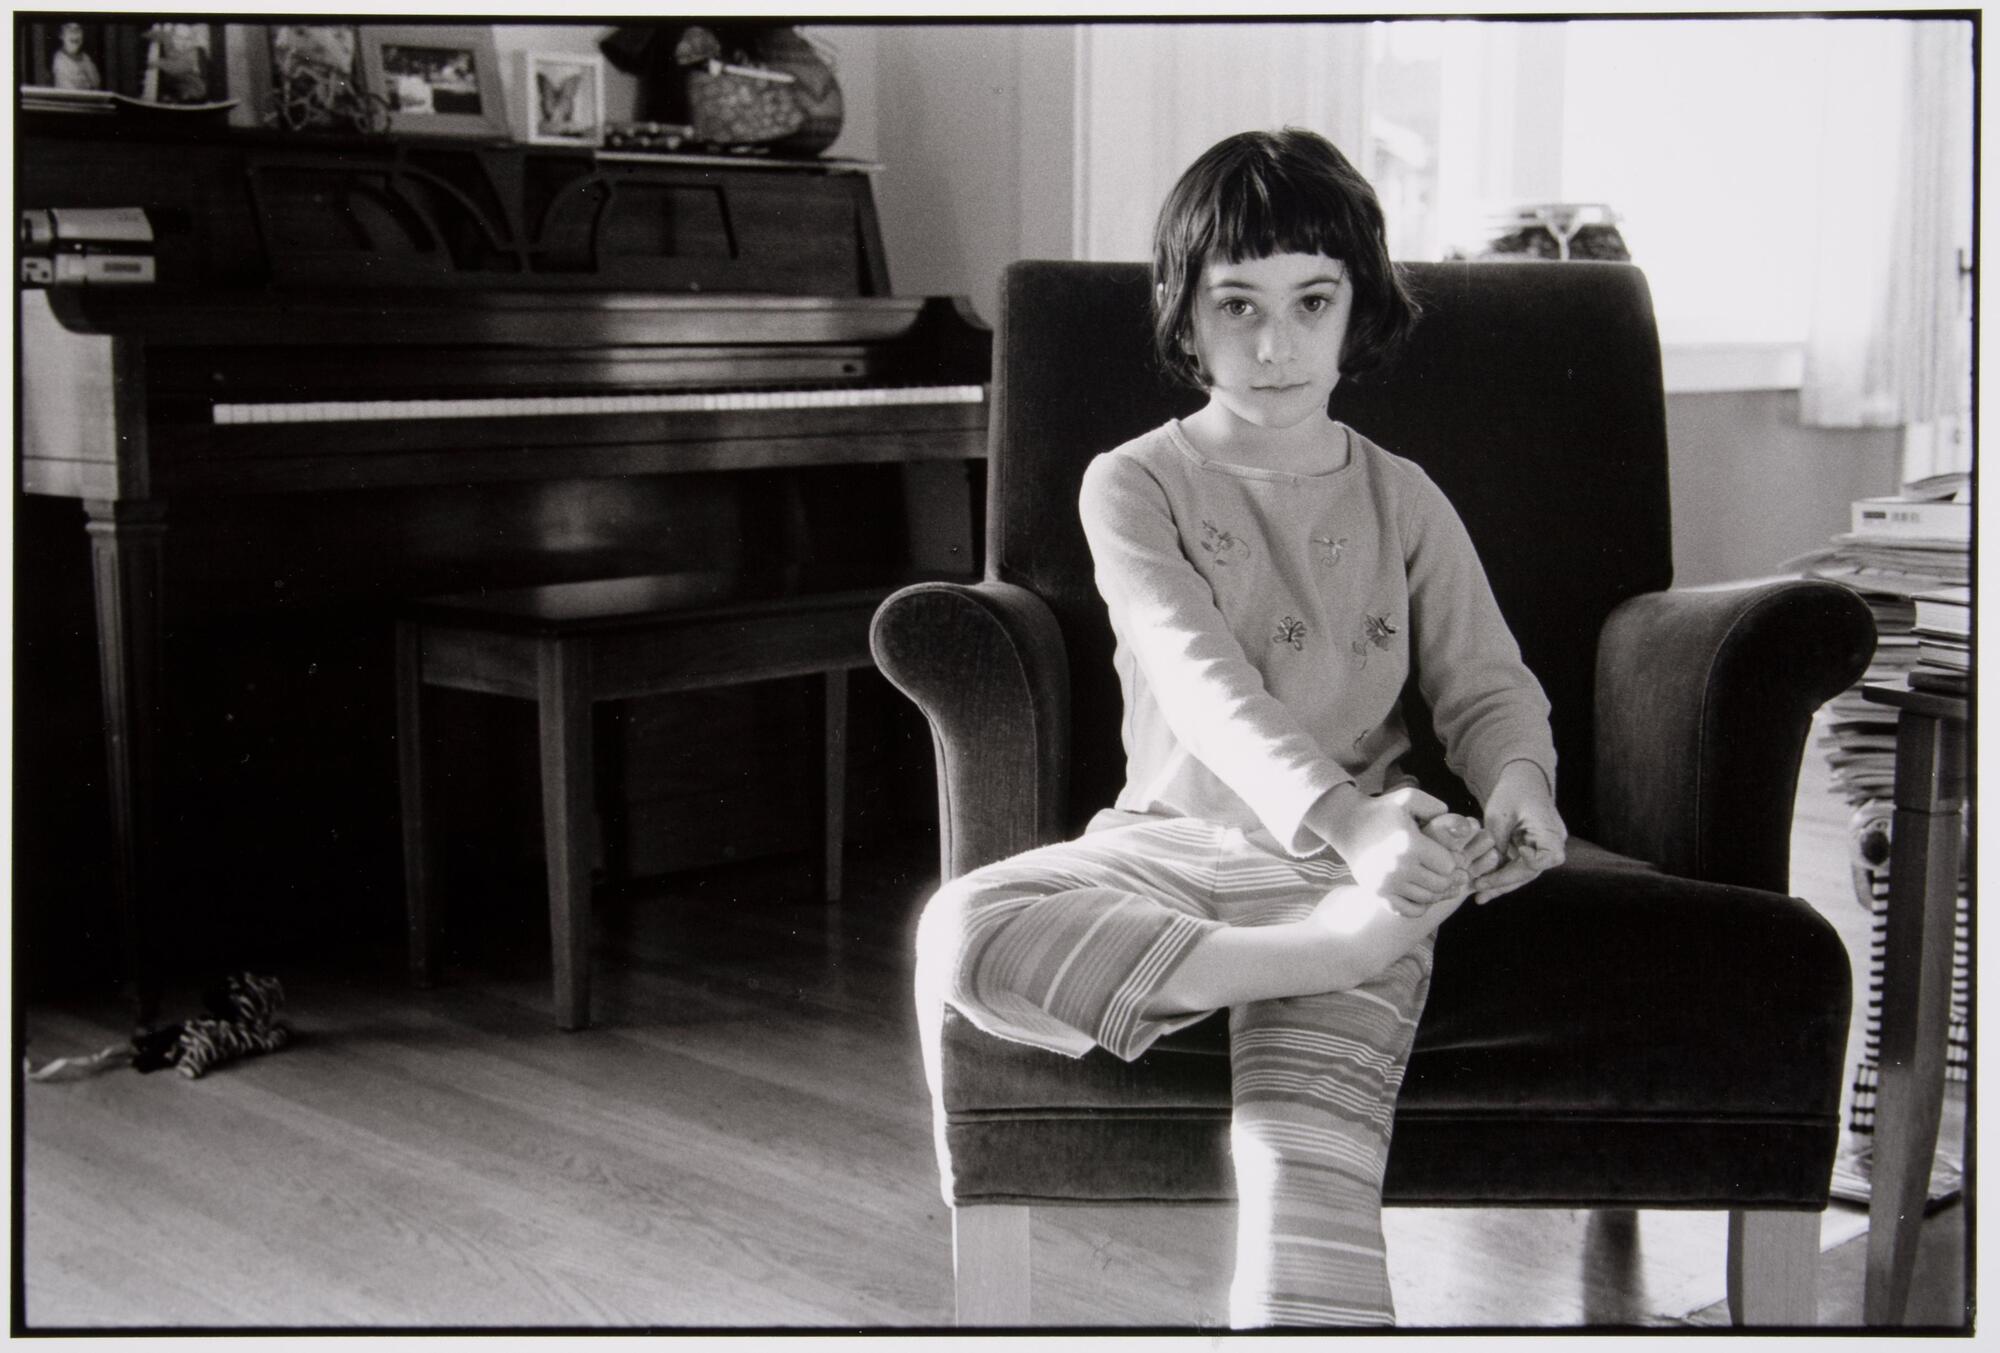 A girl with dark hair and heavy bangs is seated on a chair. Her left foot is brought up and being held by her hands. There is a piano in the background and wood floors.